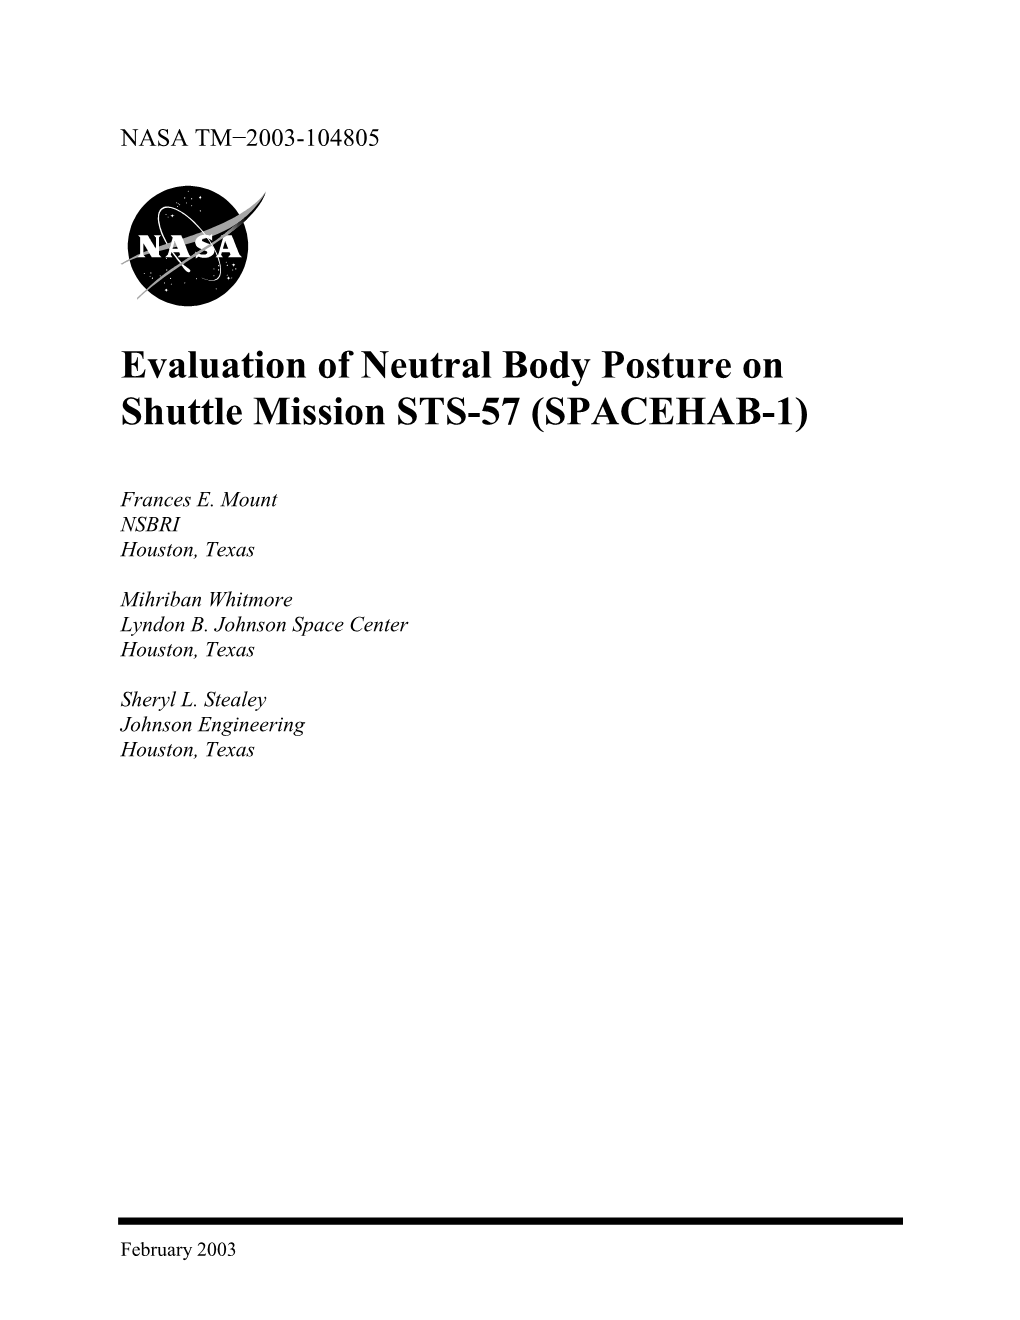 Evaluation of Neutral Body Posture on Shuttle Mission STS-57 (SPACEHAB-1)